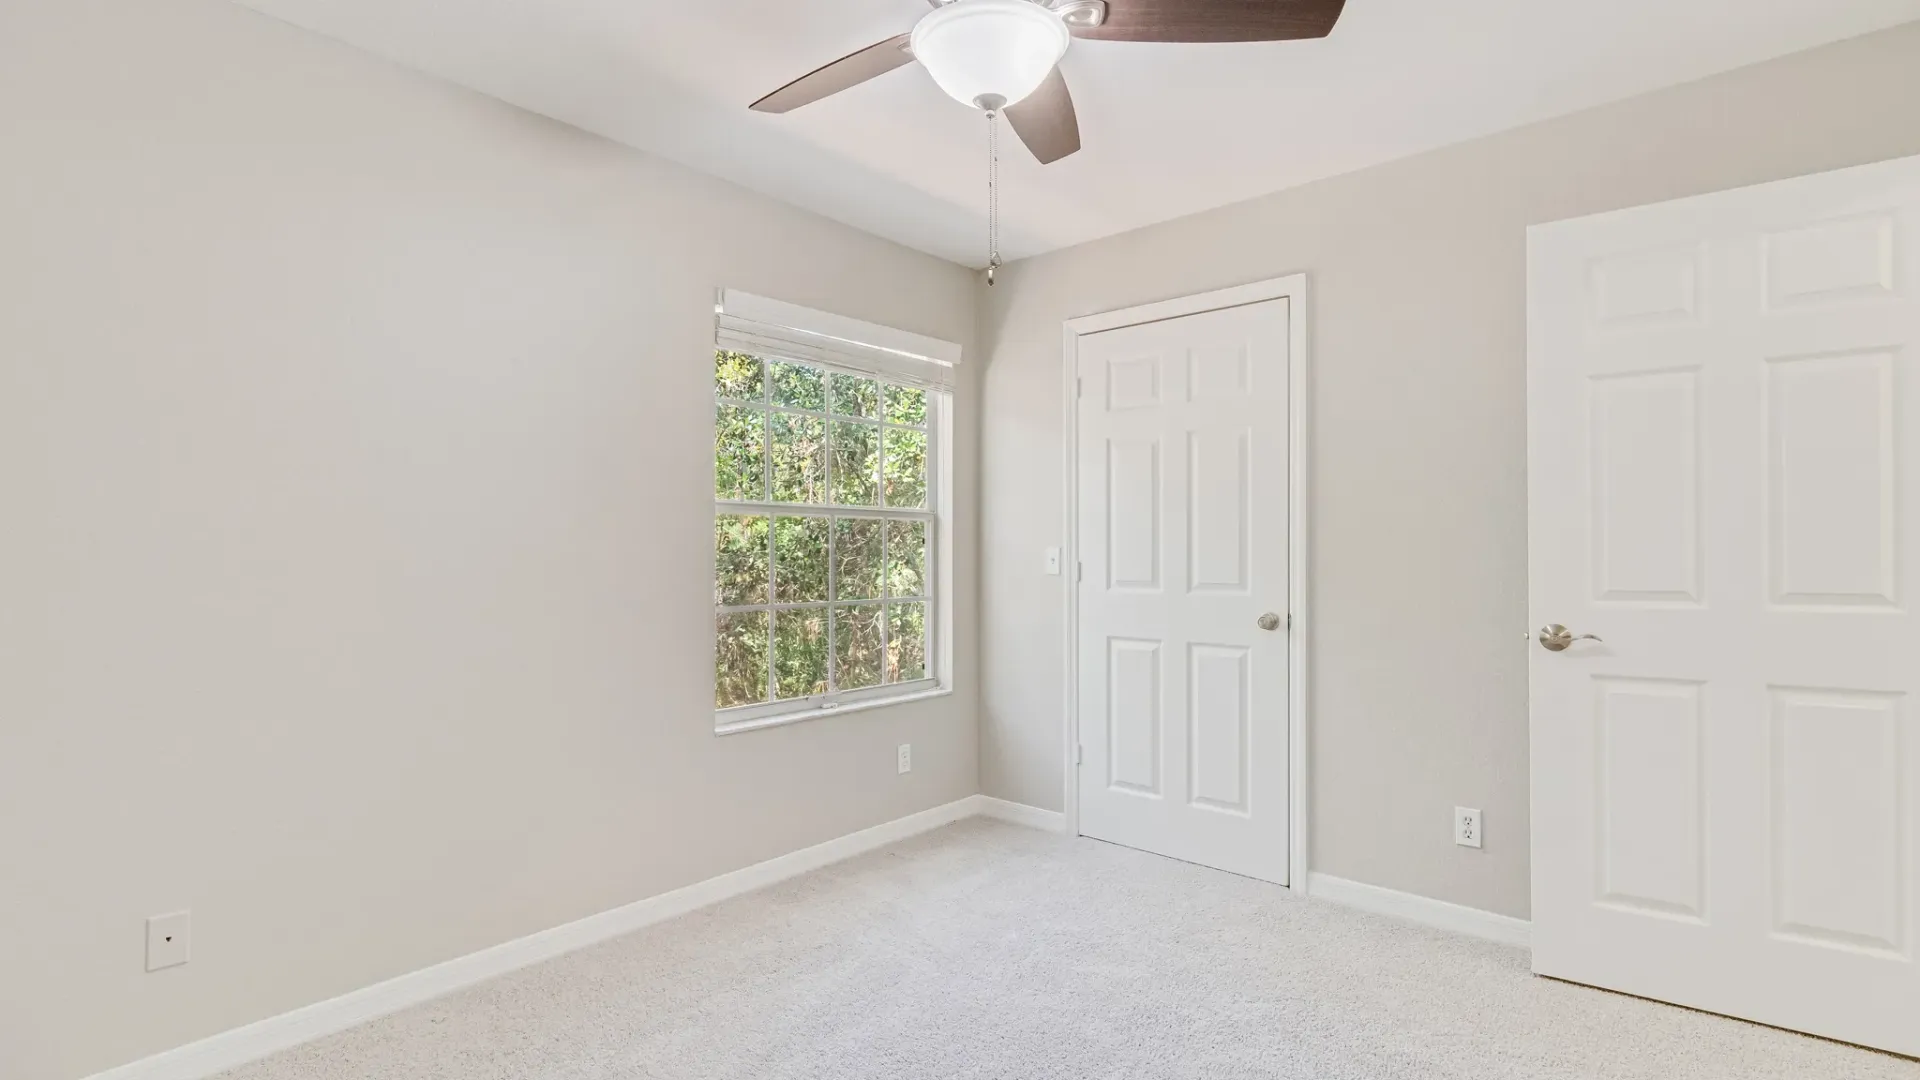 A spacious bedroom with multi-speed ceiling fan